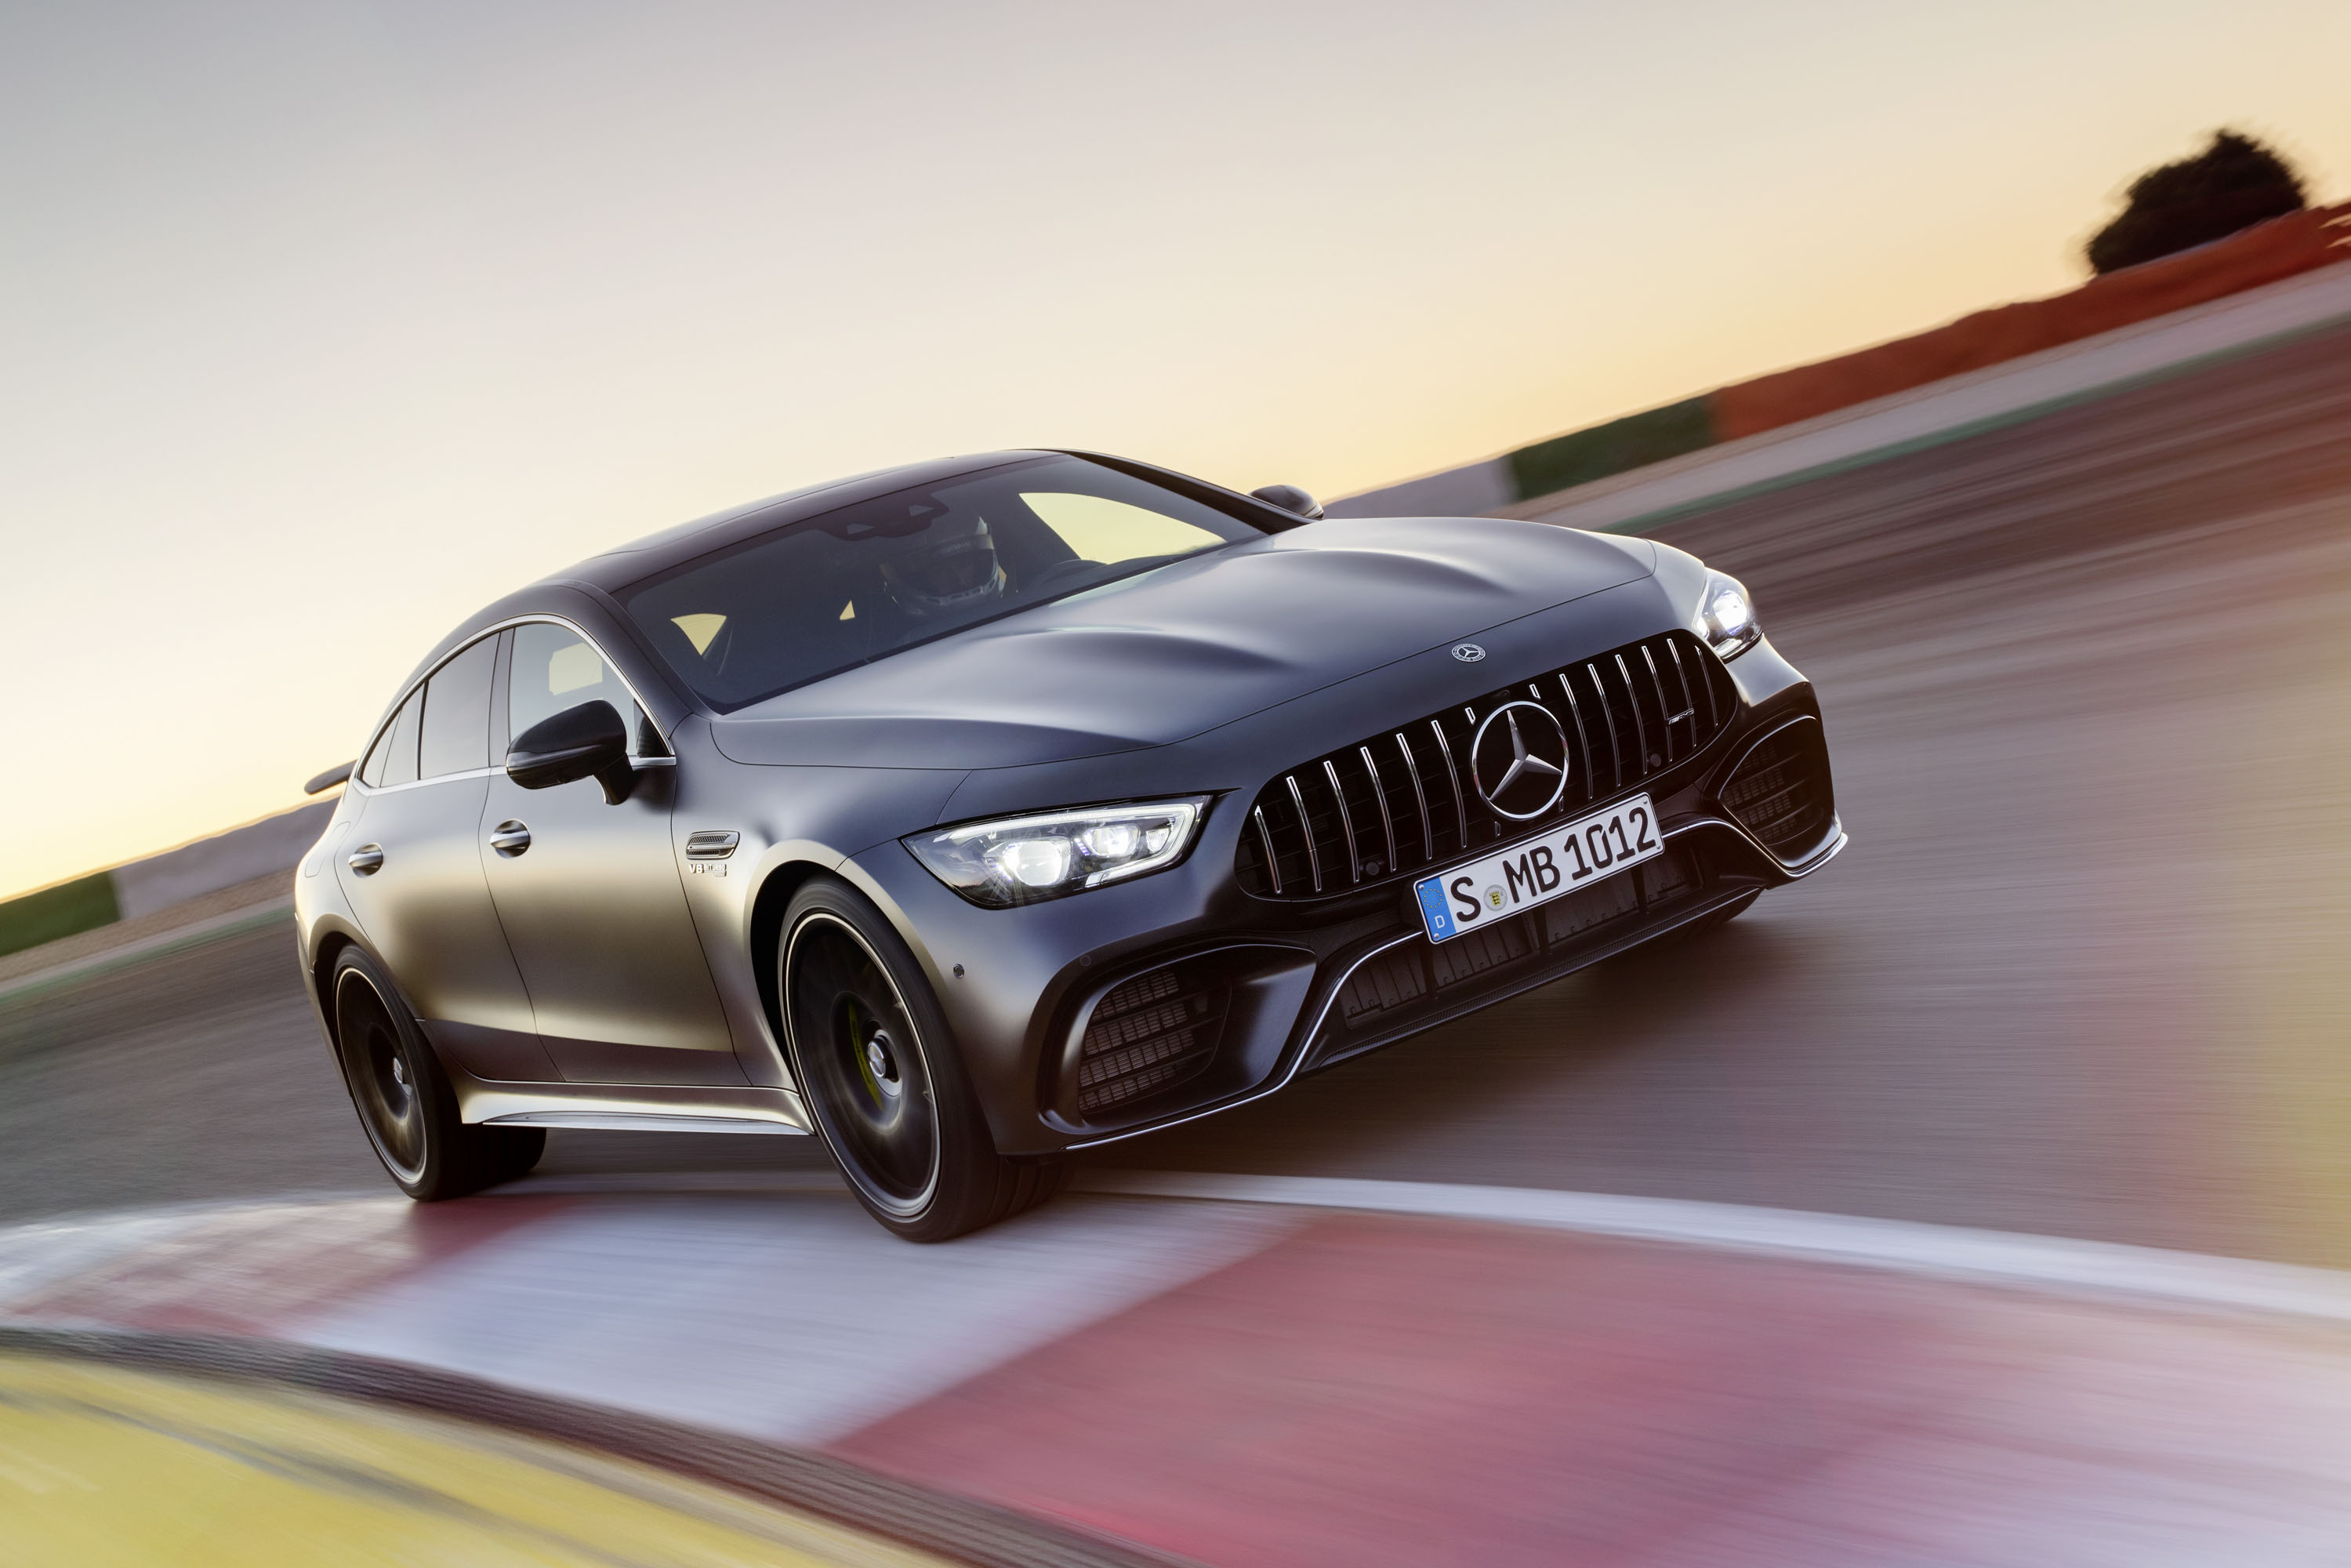 19 Mercedes Benz Amg Gt Review Ratings Specs Prices And Photos The Car Connection